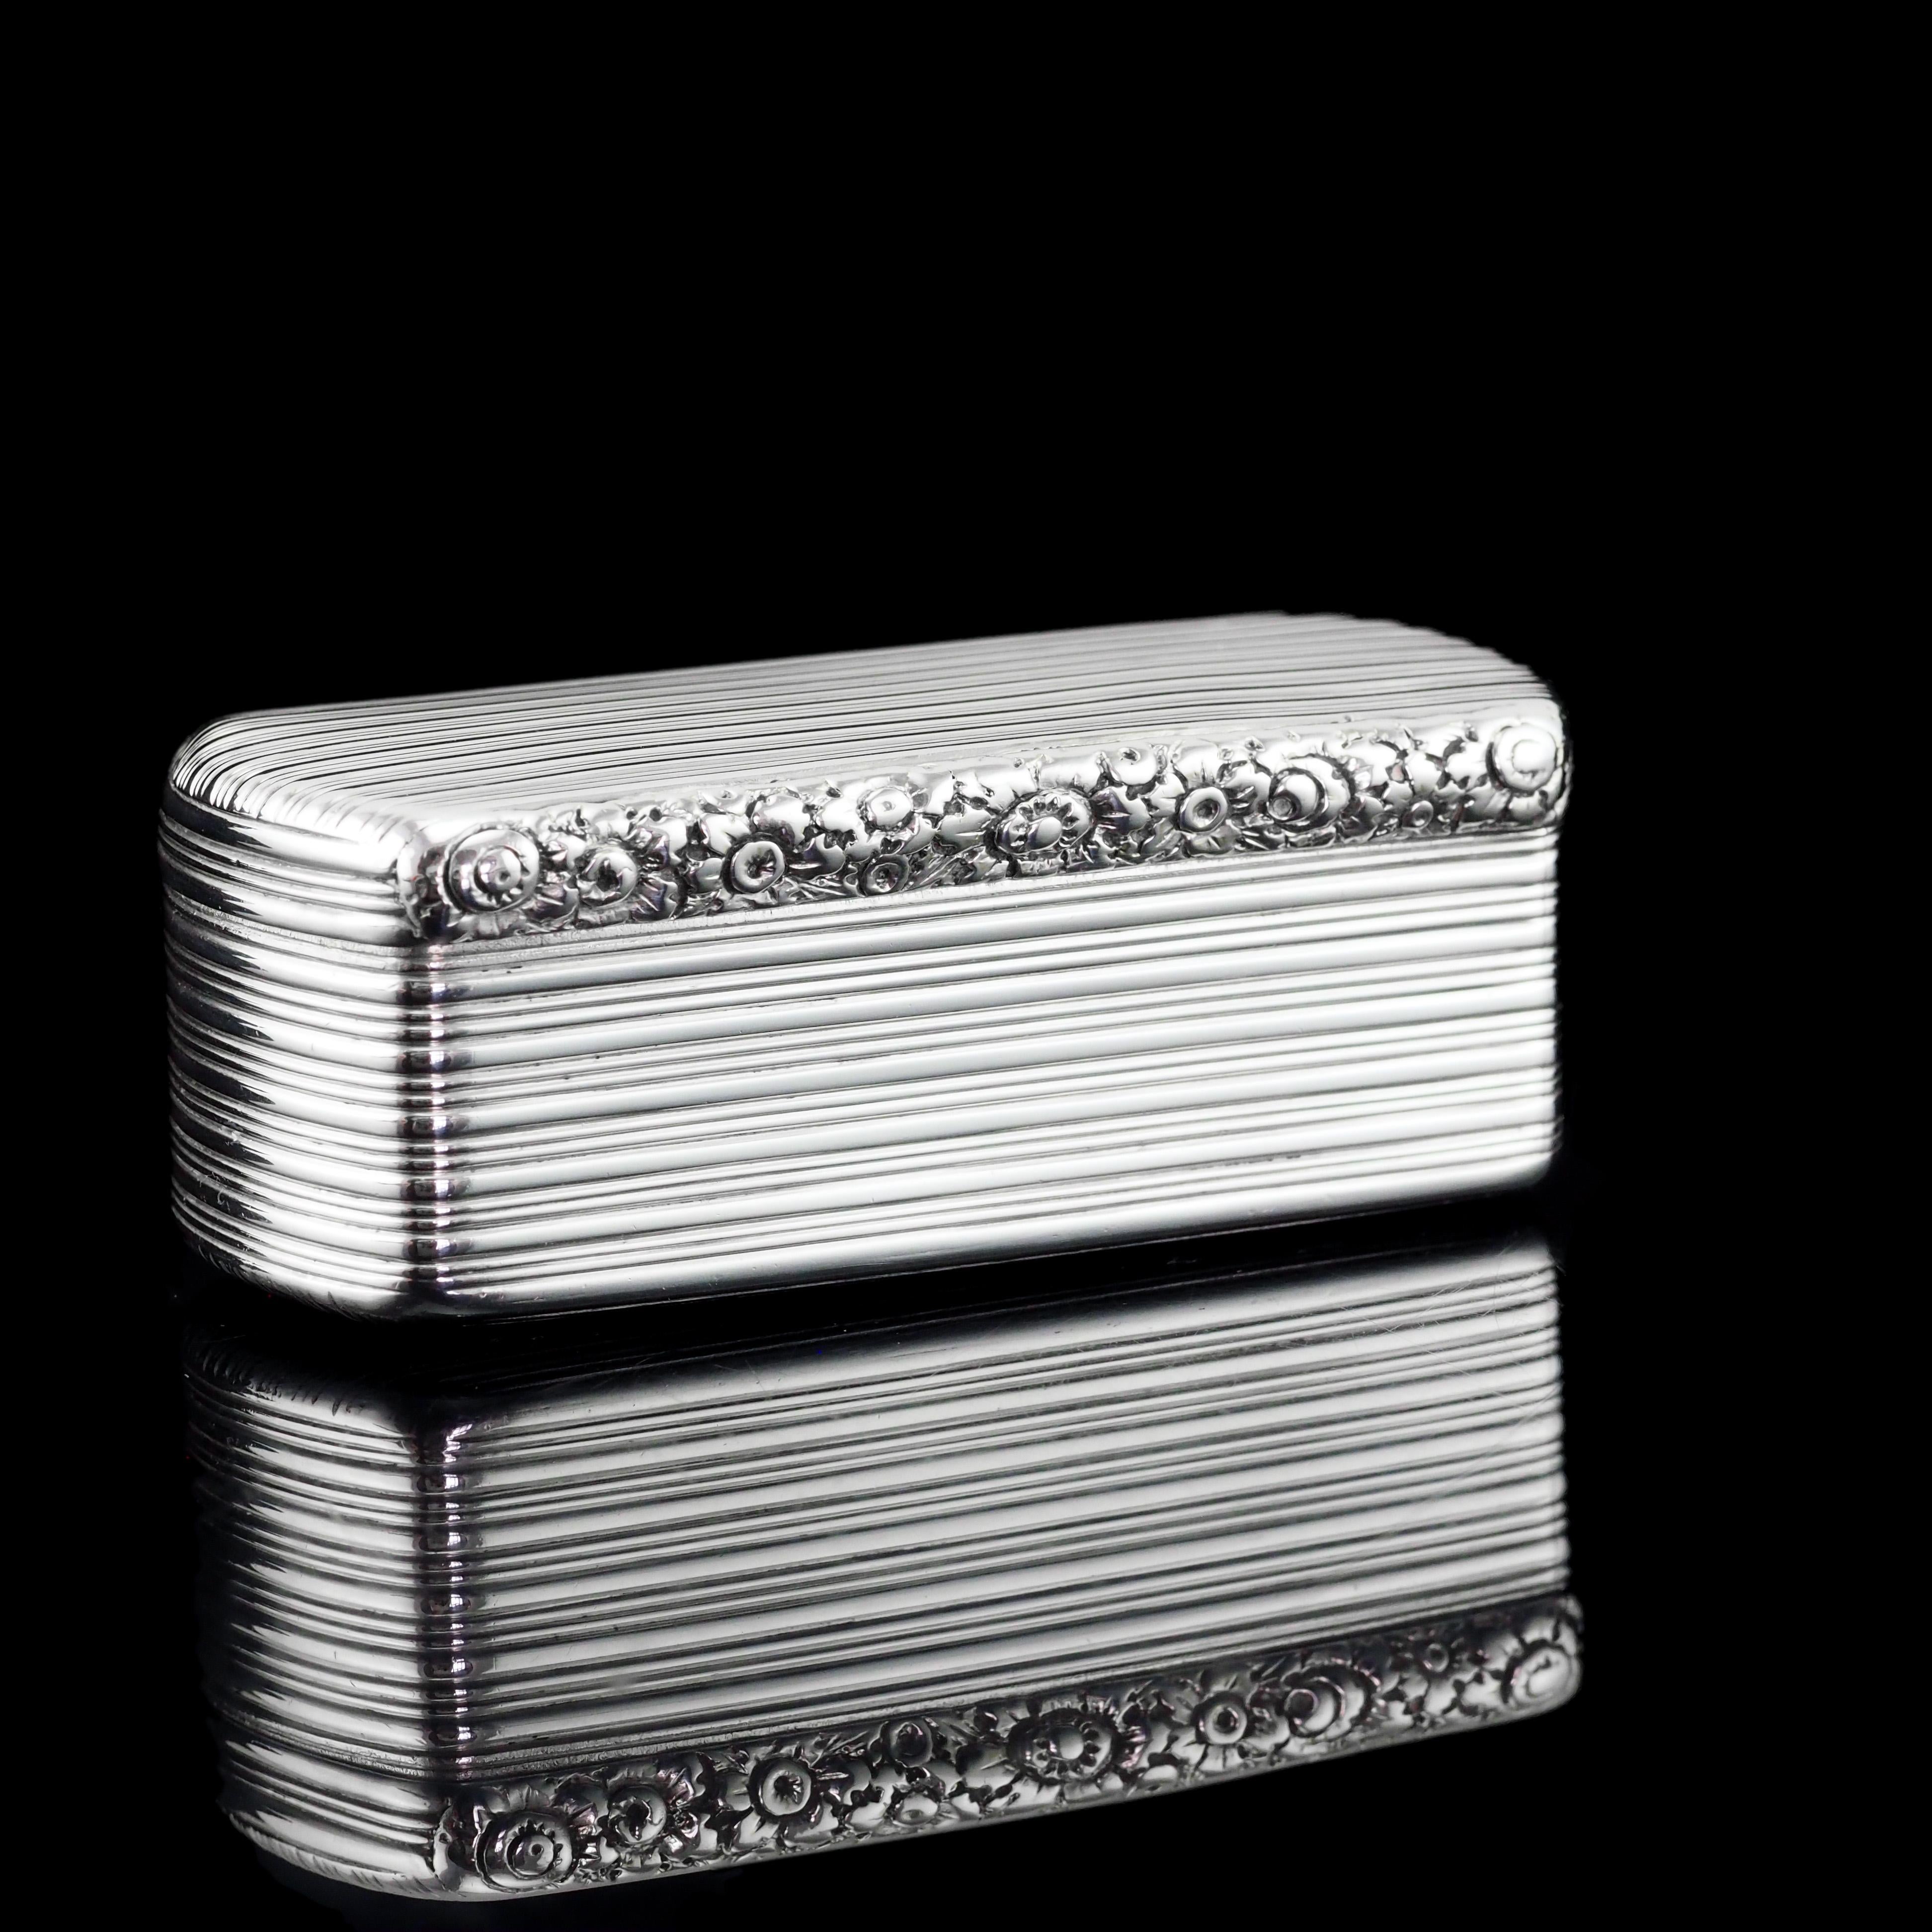 Antique Georgian Solid Silver Snuff Box Oblong Shape with Reeded Lines - Charles In Good Condition For Sale In London, GB